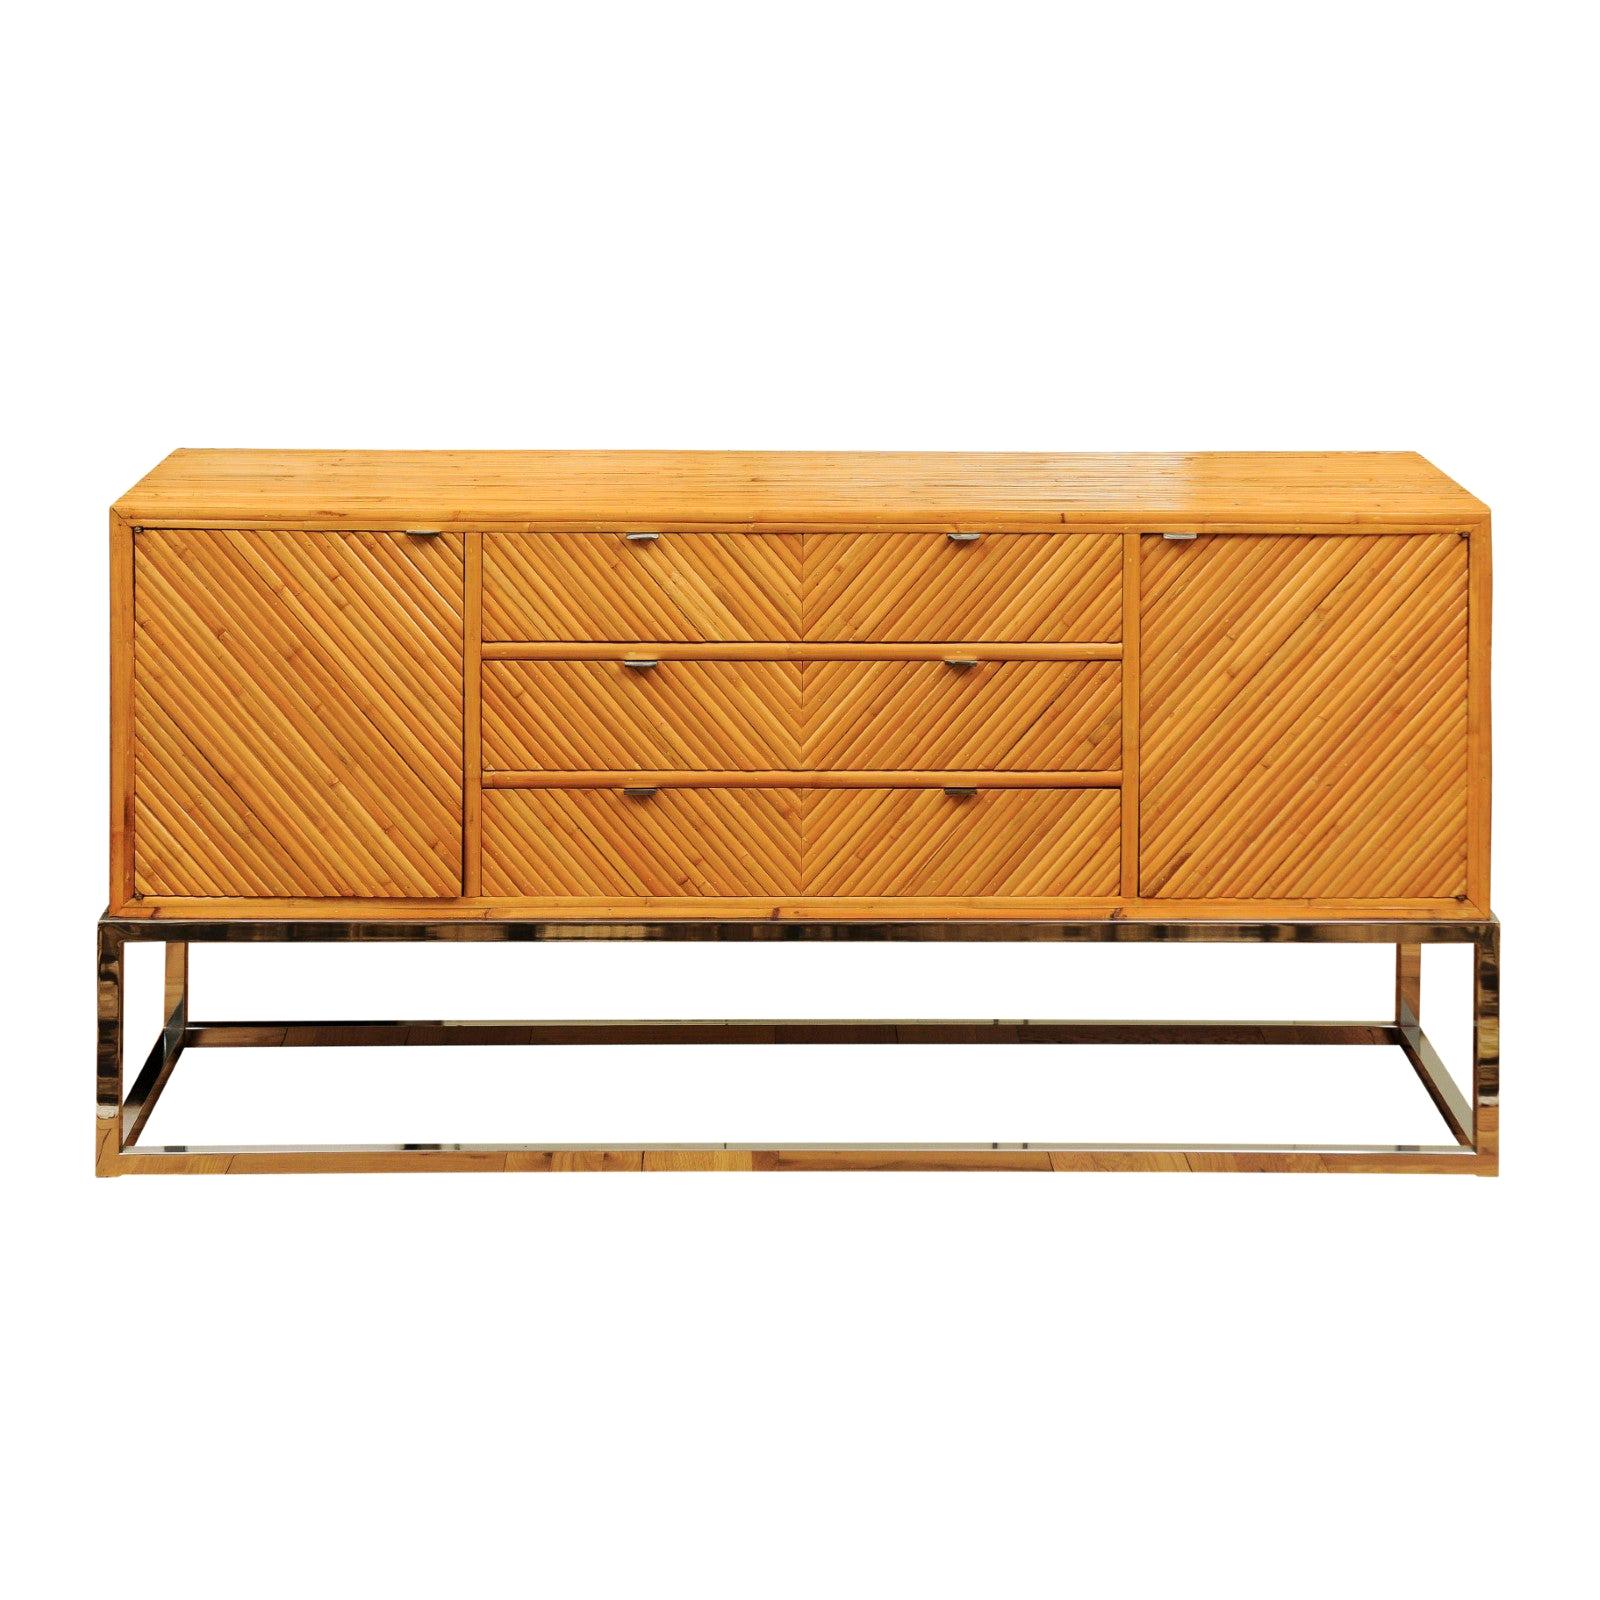 Superb Restored Bamboo Credenza in the Style of Milo Baughman, circa 1975 For Sale